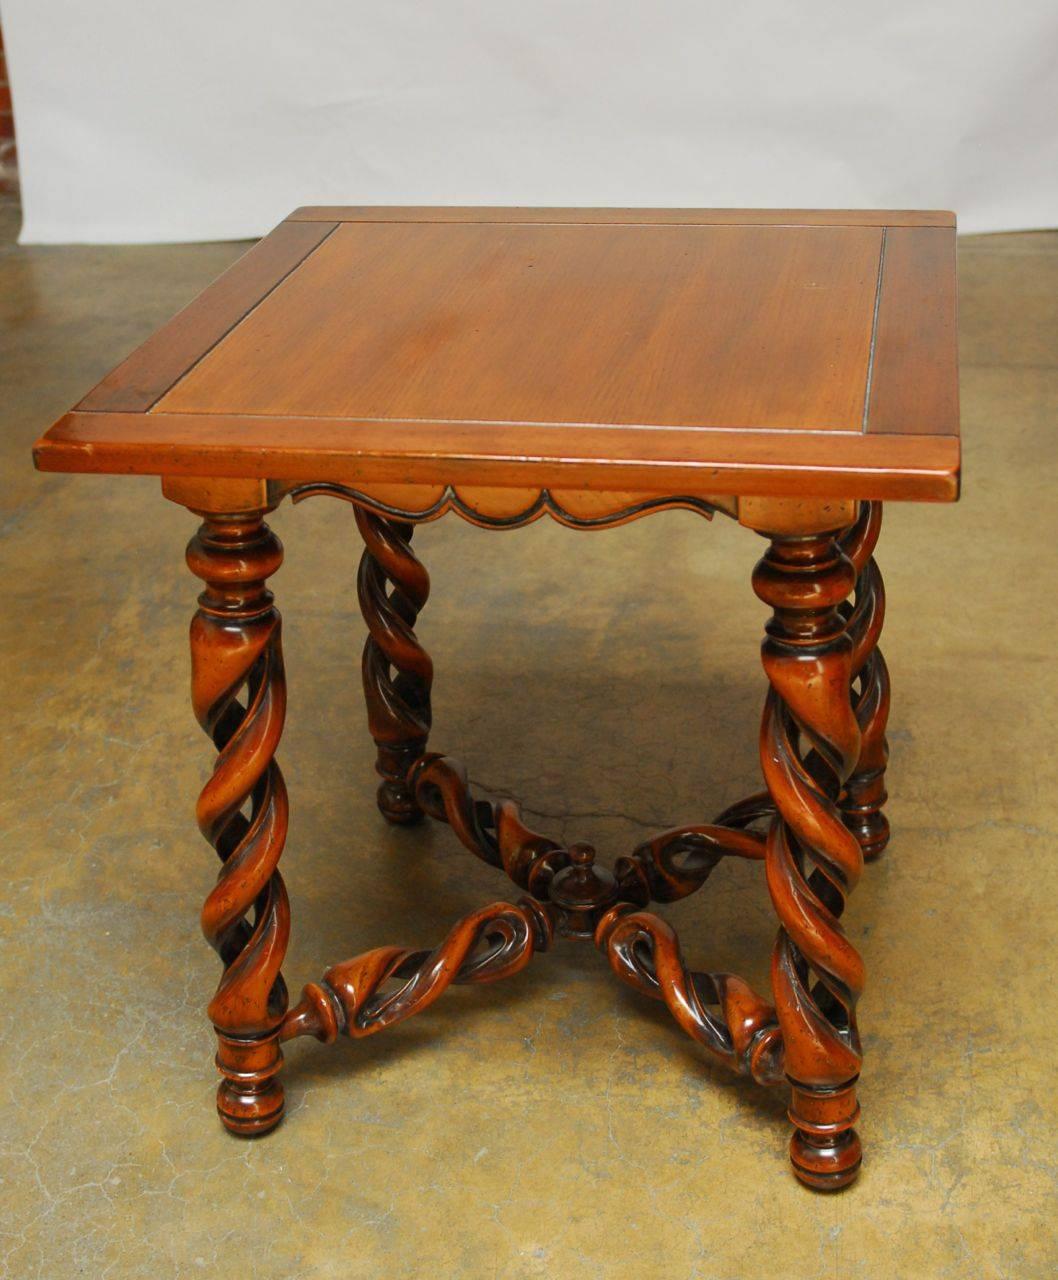 Impressive carved square center table featuring an open barley twist style legs and stretchers, terminating in a small center finial. Made in the Louis XIII style with a shaped apron. Unique reinterpretation of a Classic table with superior